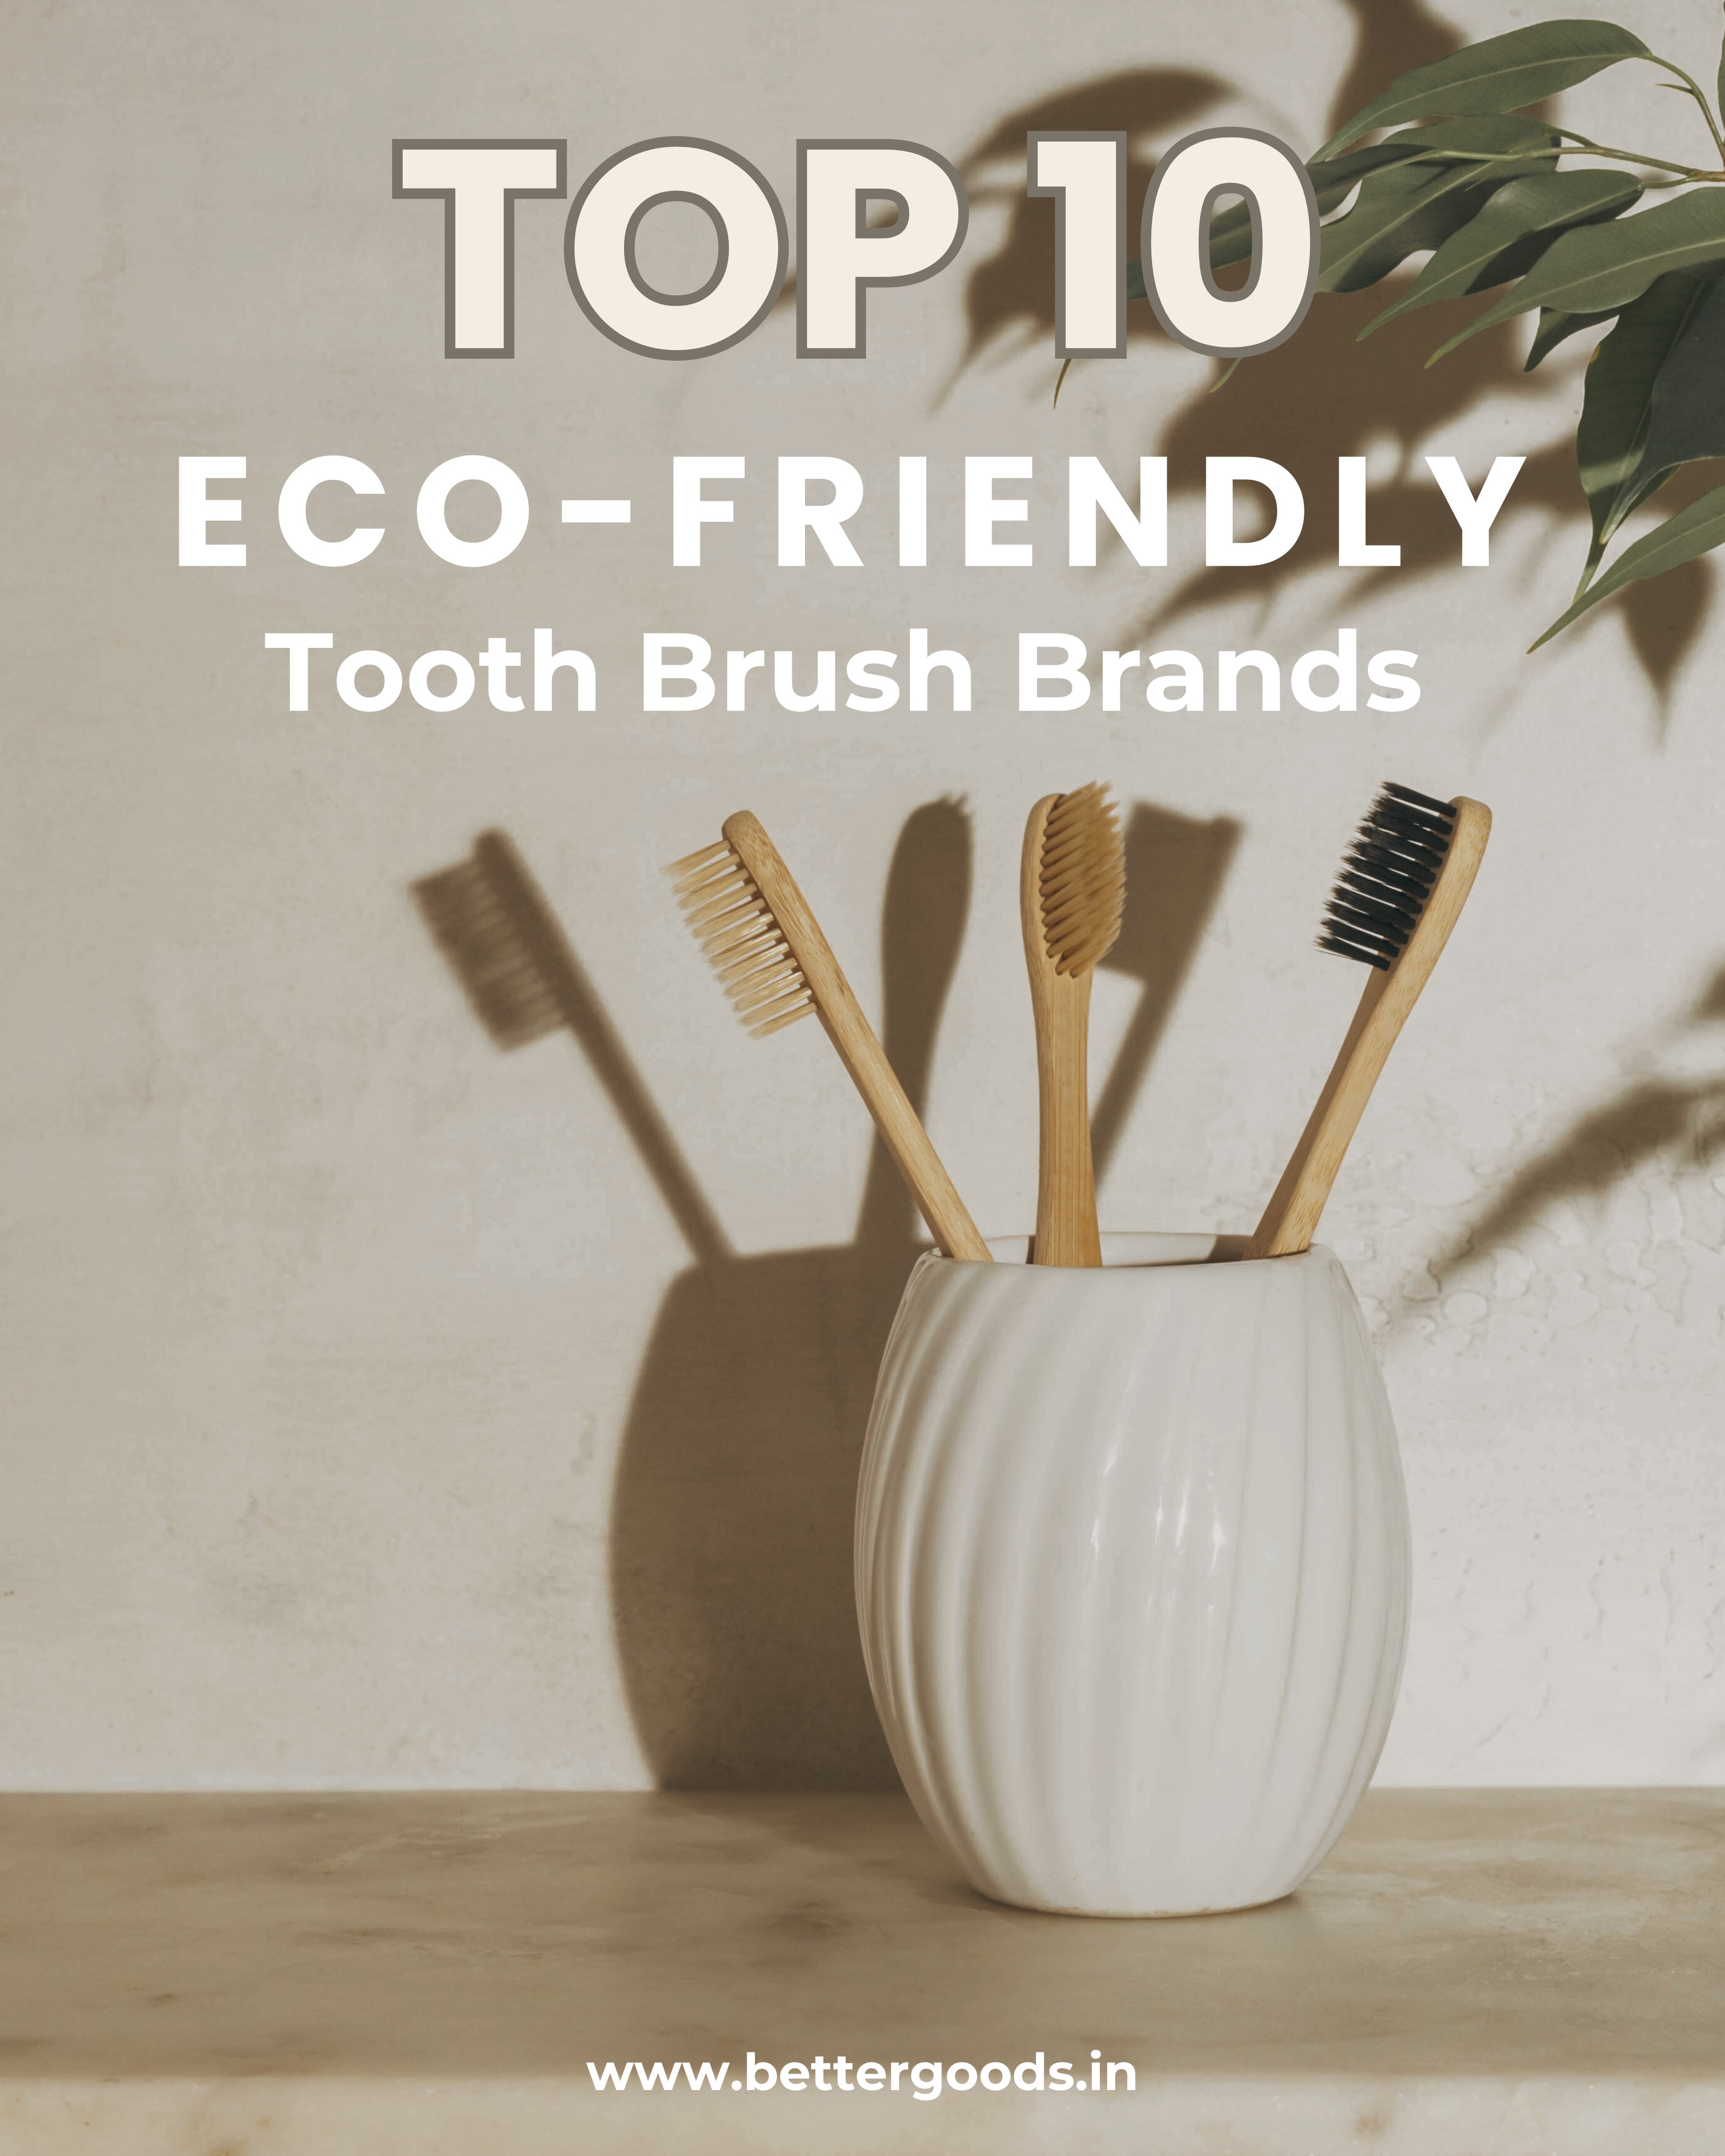 Embrace Green Smiles: Top 10 Eco-Friendly Toothbrushes for Sustainable Oral Care